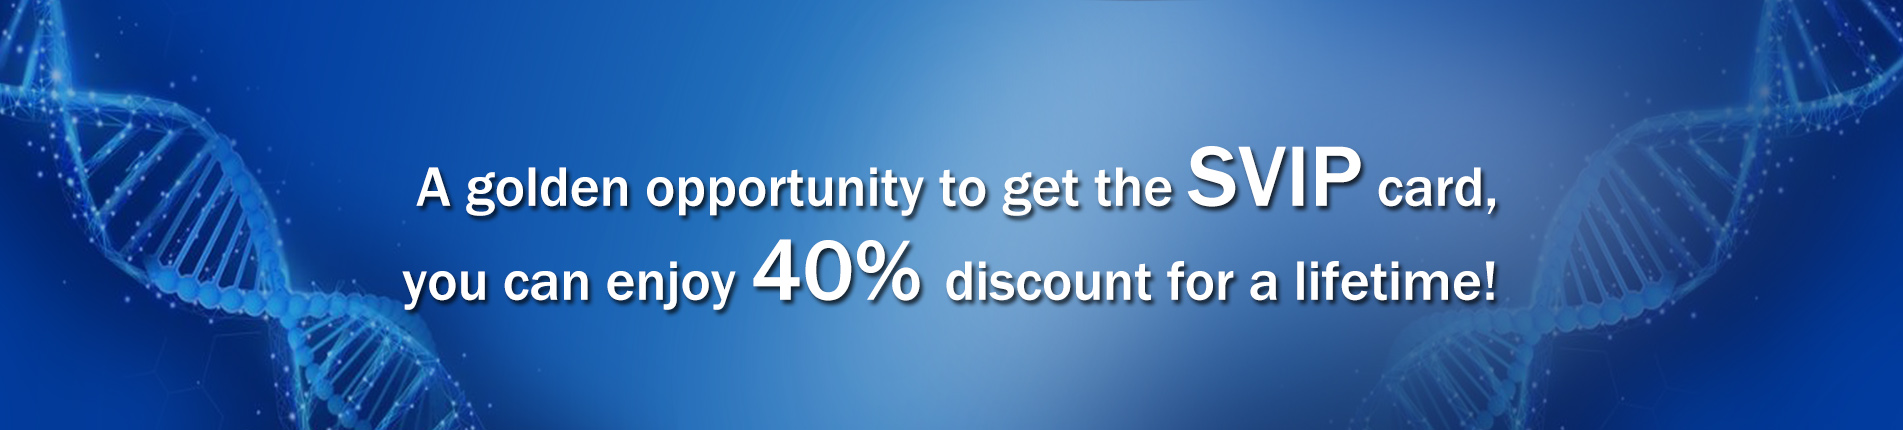 A golden opportunity to get the SVIP card,you can enjoy 40% discount for a lifetime!